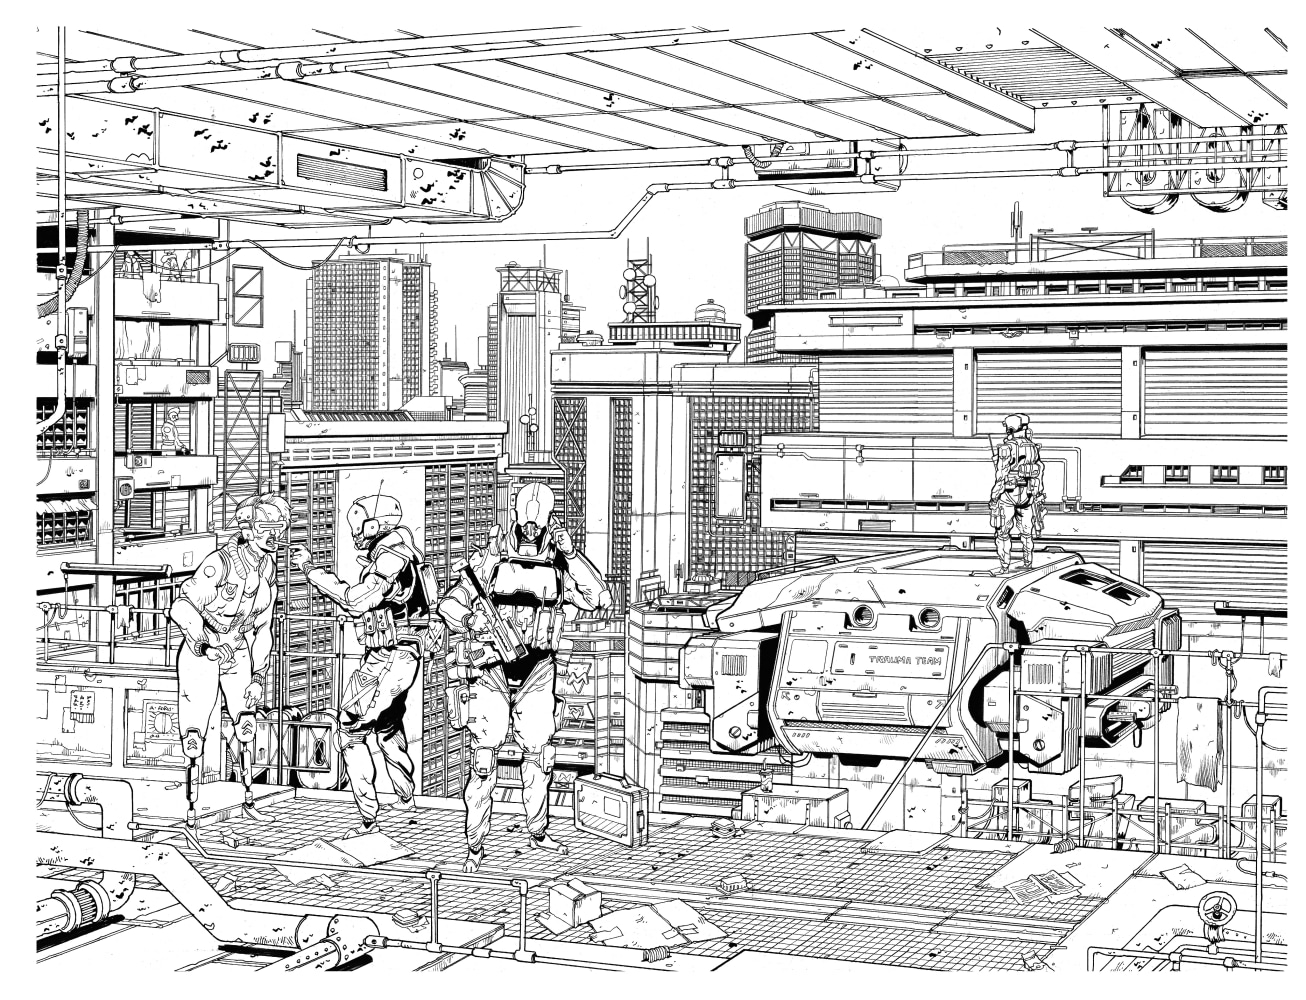 Mathieu Bablet

Cyberpunk 2077, 2021

Inactinic np and china ink on paper

Framed: 25 x 32 3/4 inches

$9,000 - Sold

&amp;nbsp;